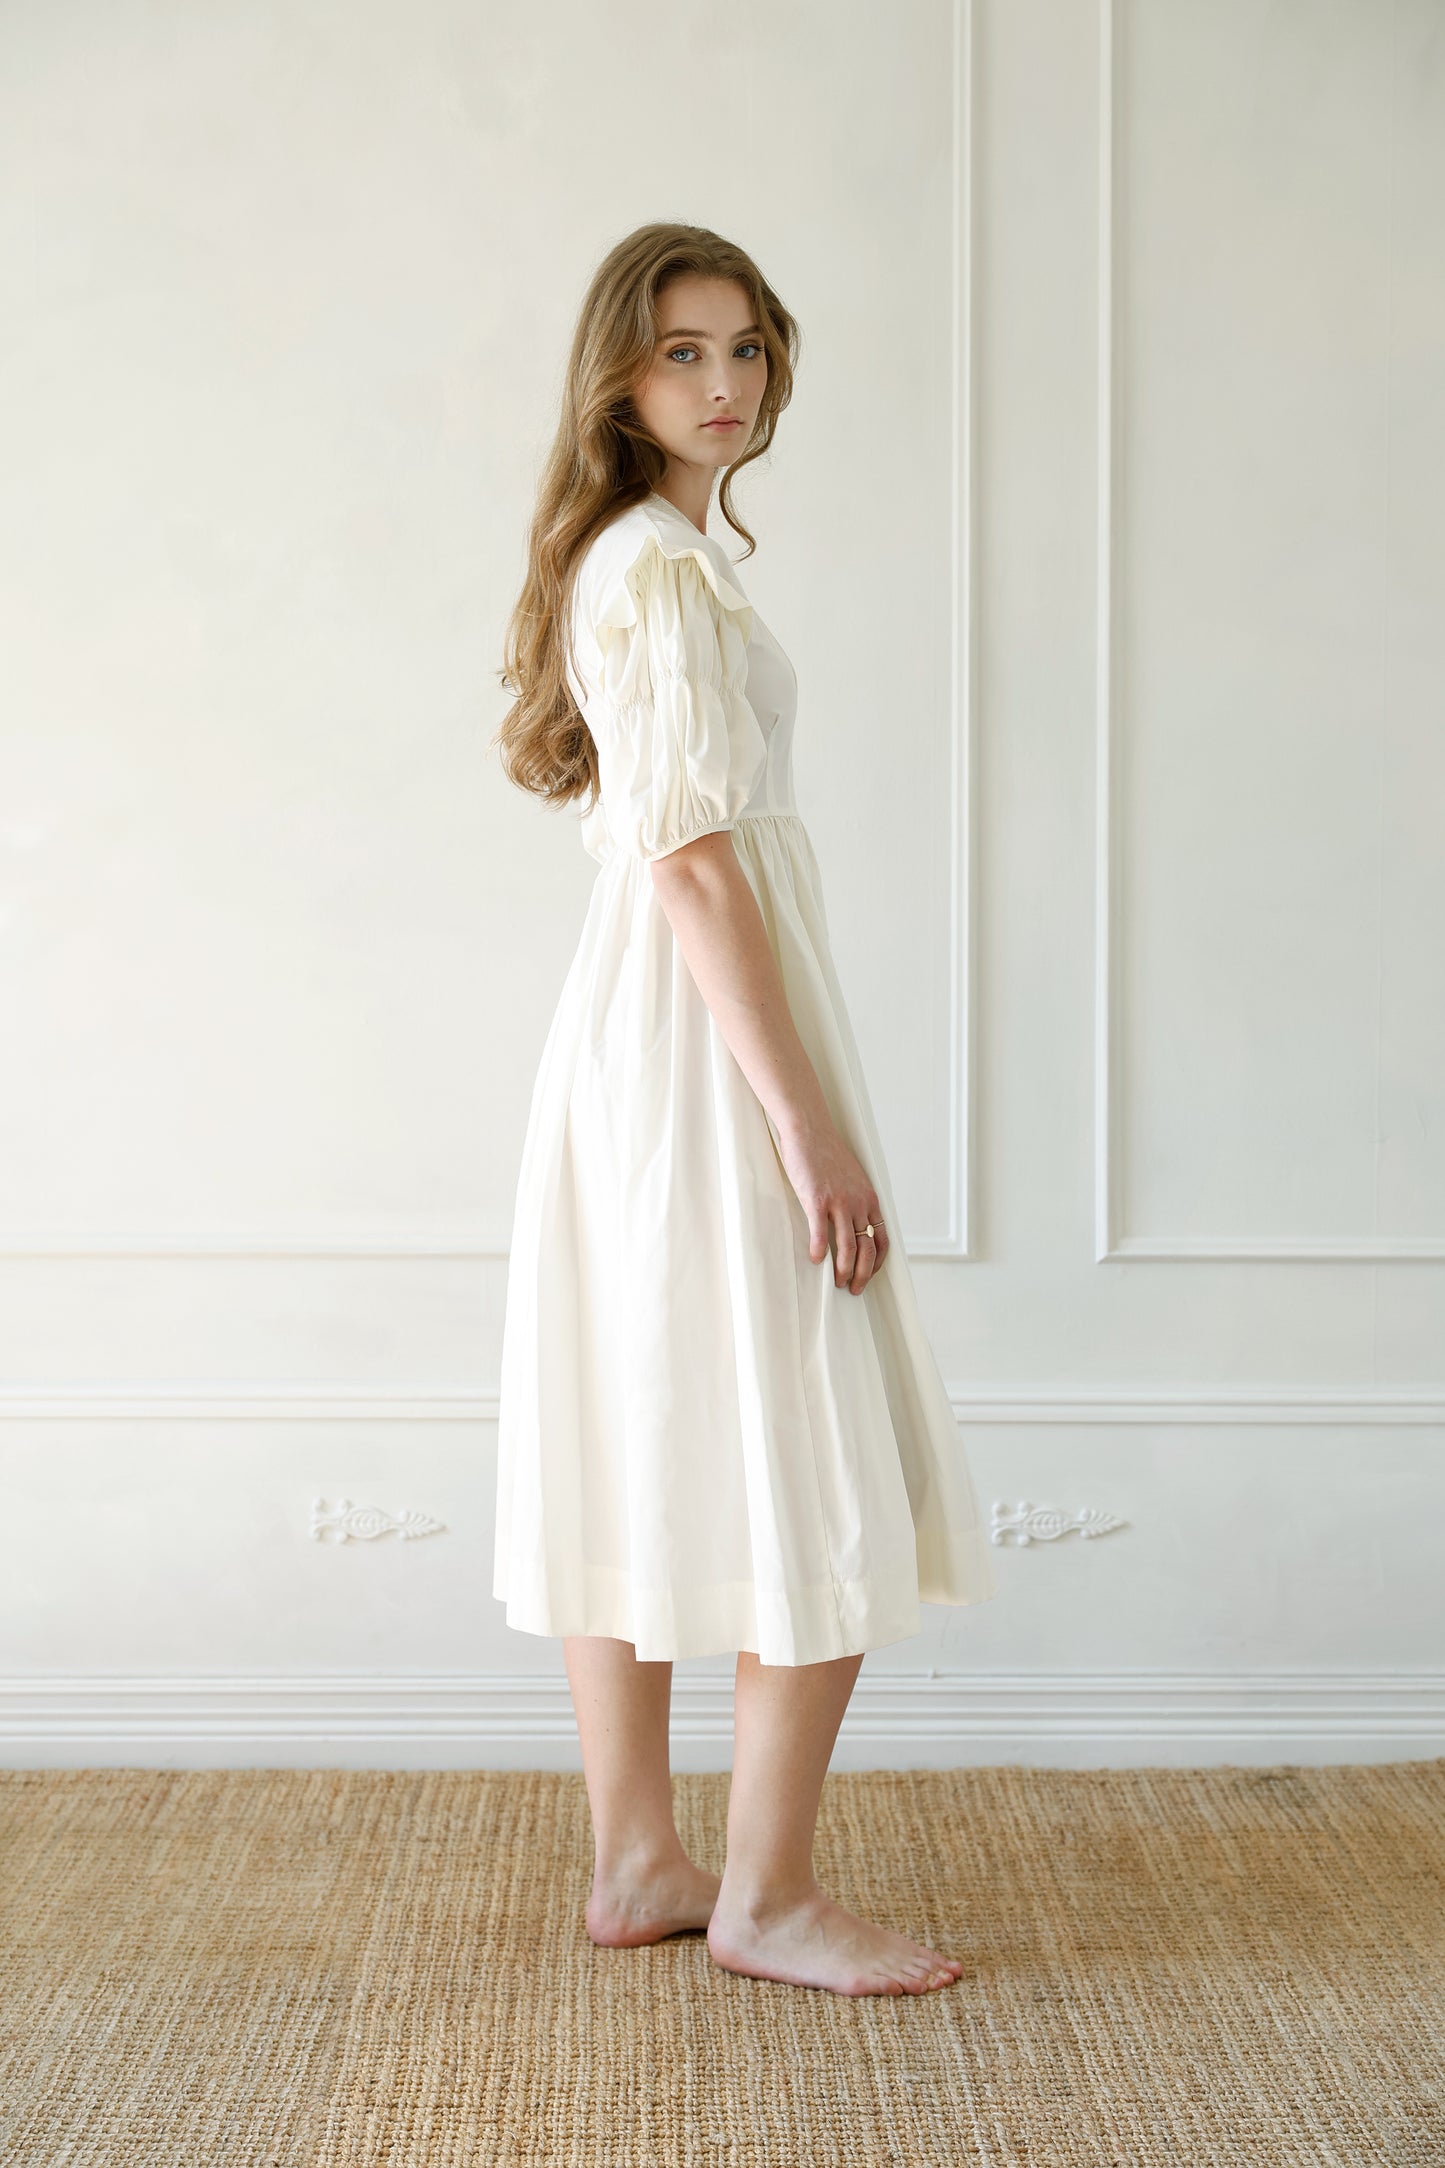 Ophelia dress in ivory cotton